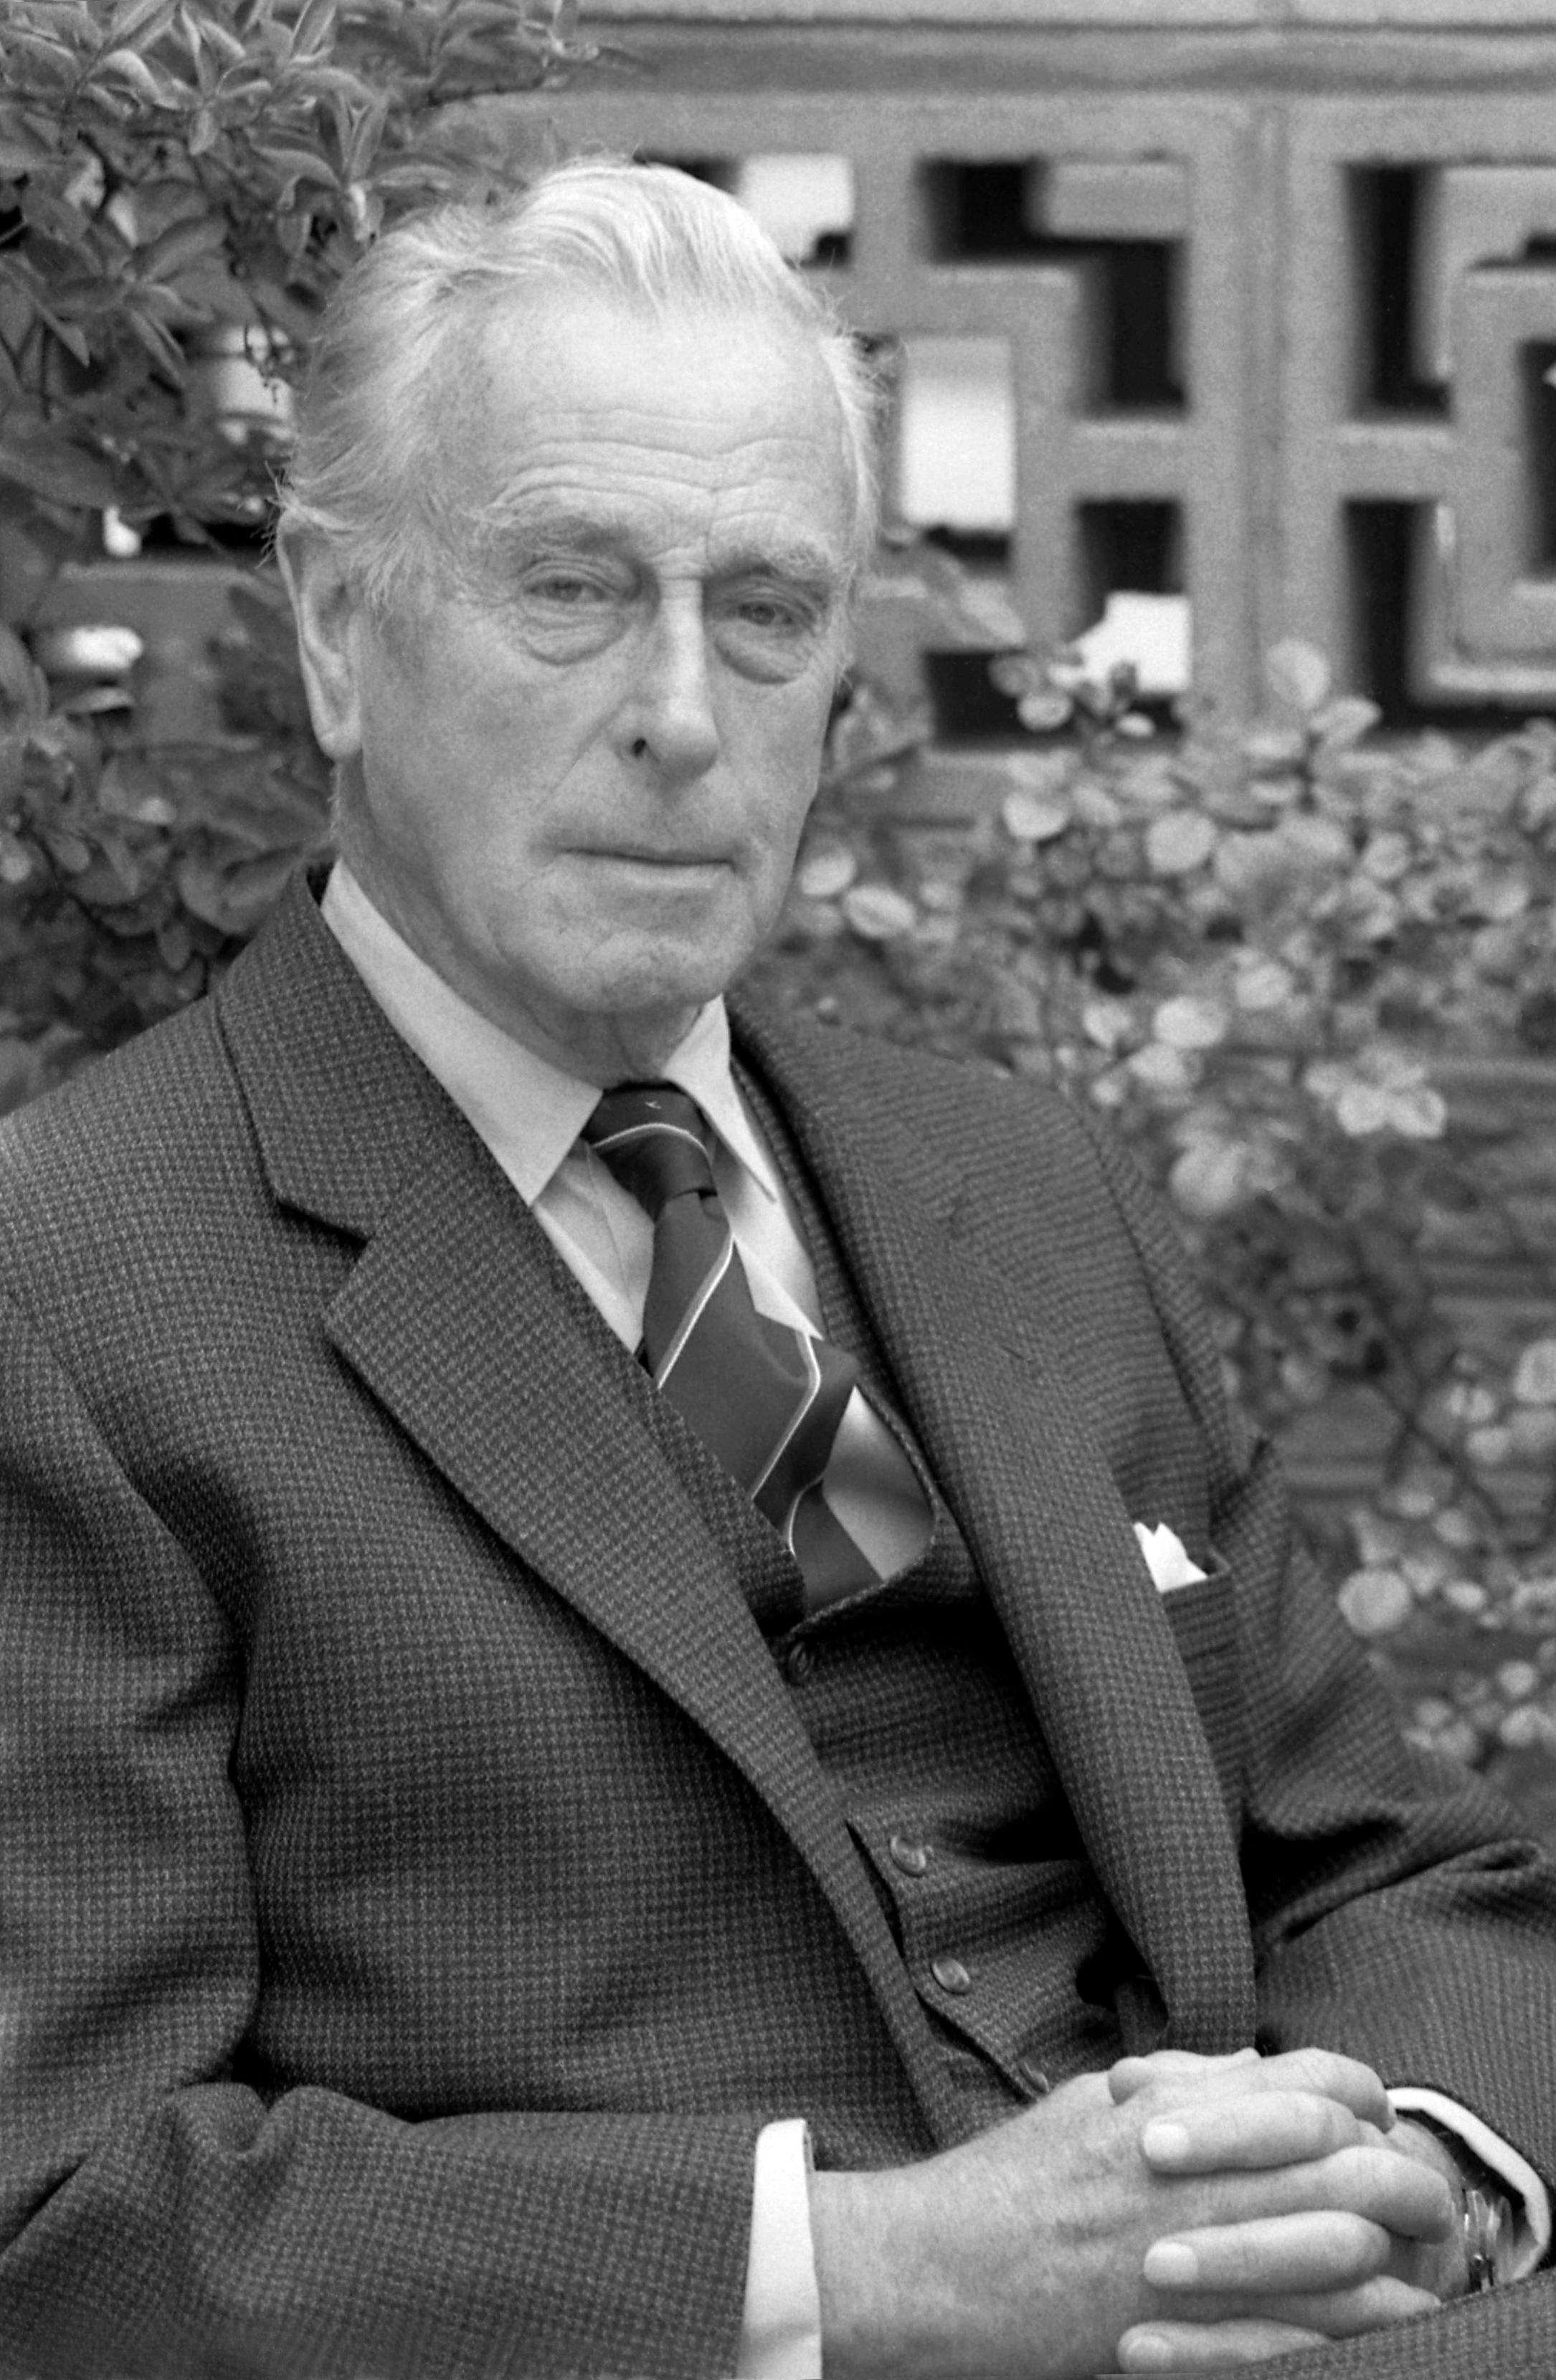 Earl Louis Mountbatten at the terrace of his home, Belgravia, London, England, United Kingdom, 1976